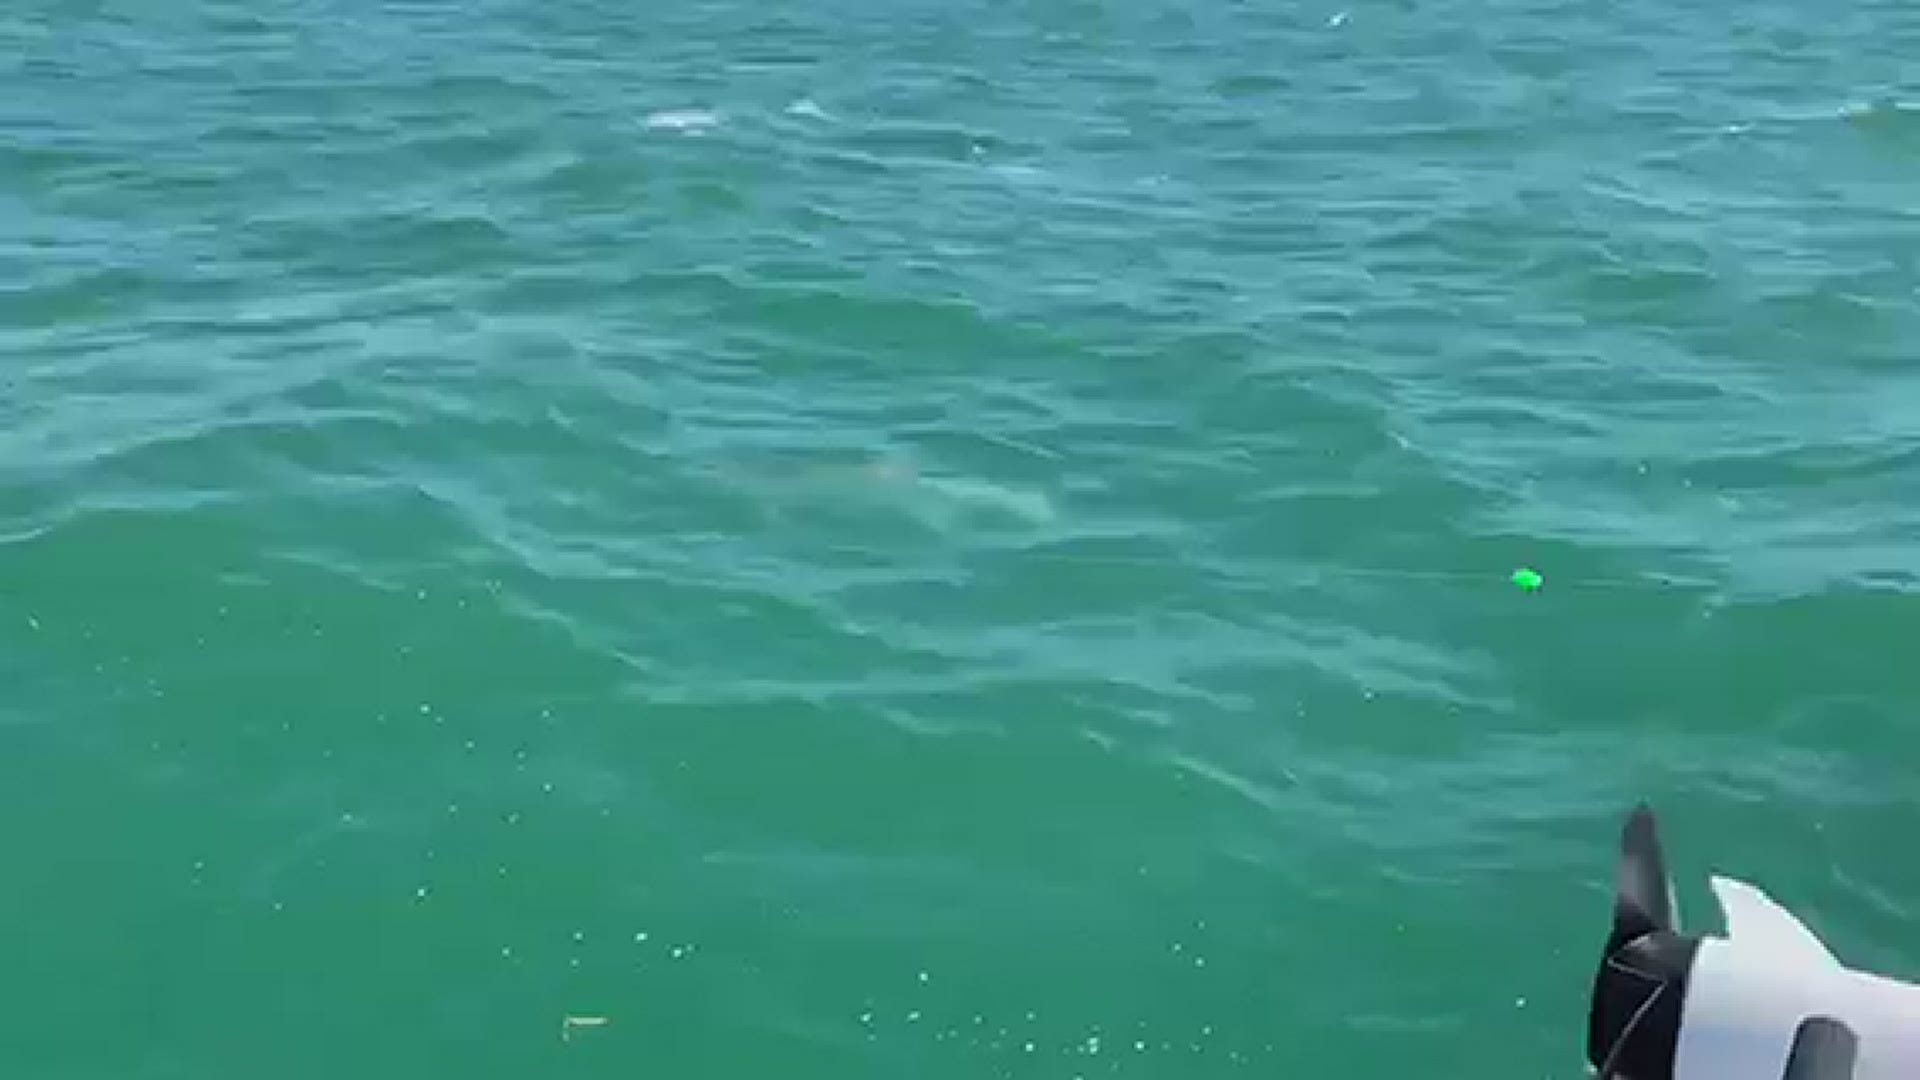 The video was taken by local anglers in Sarasota.